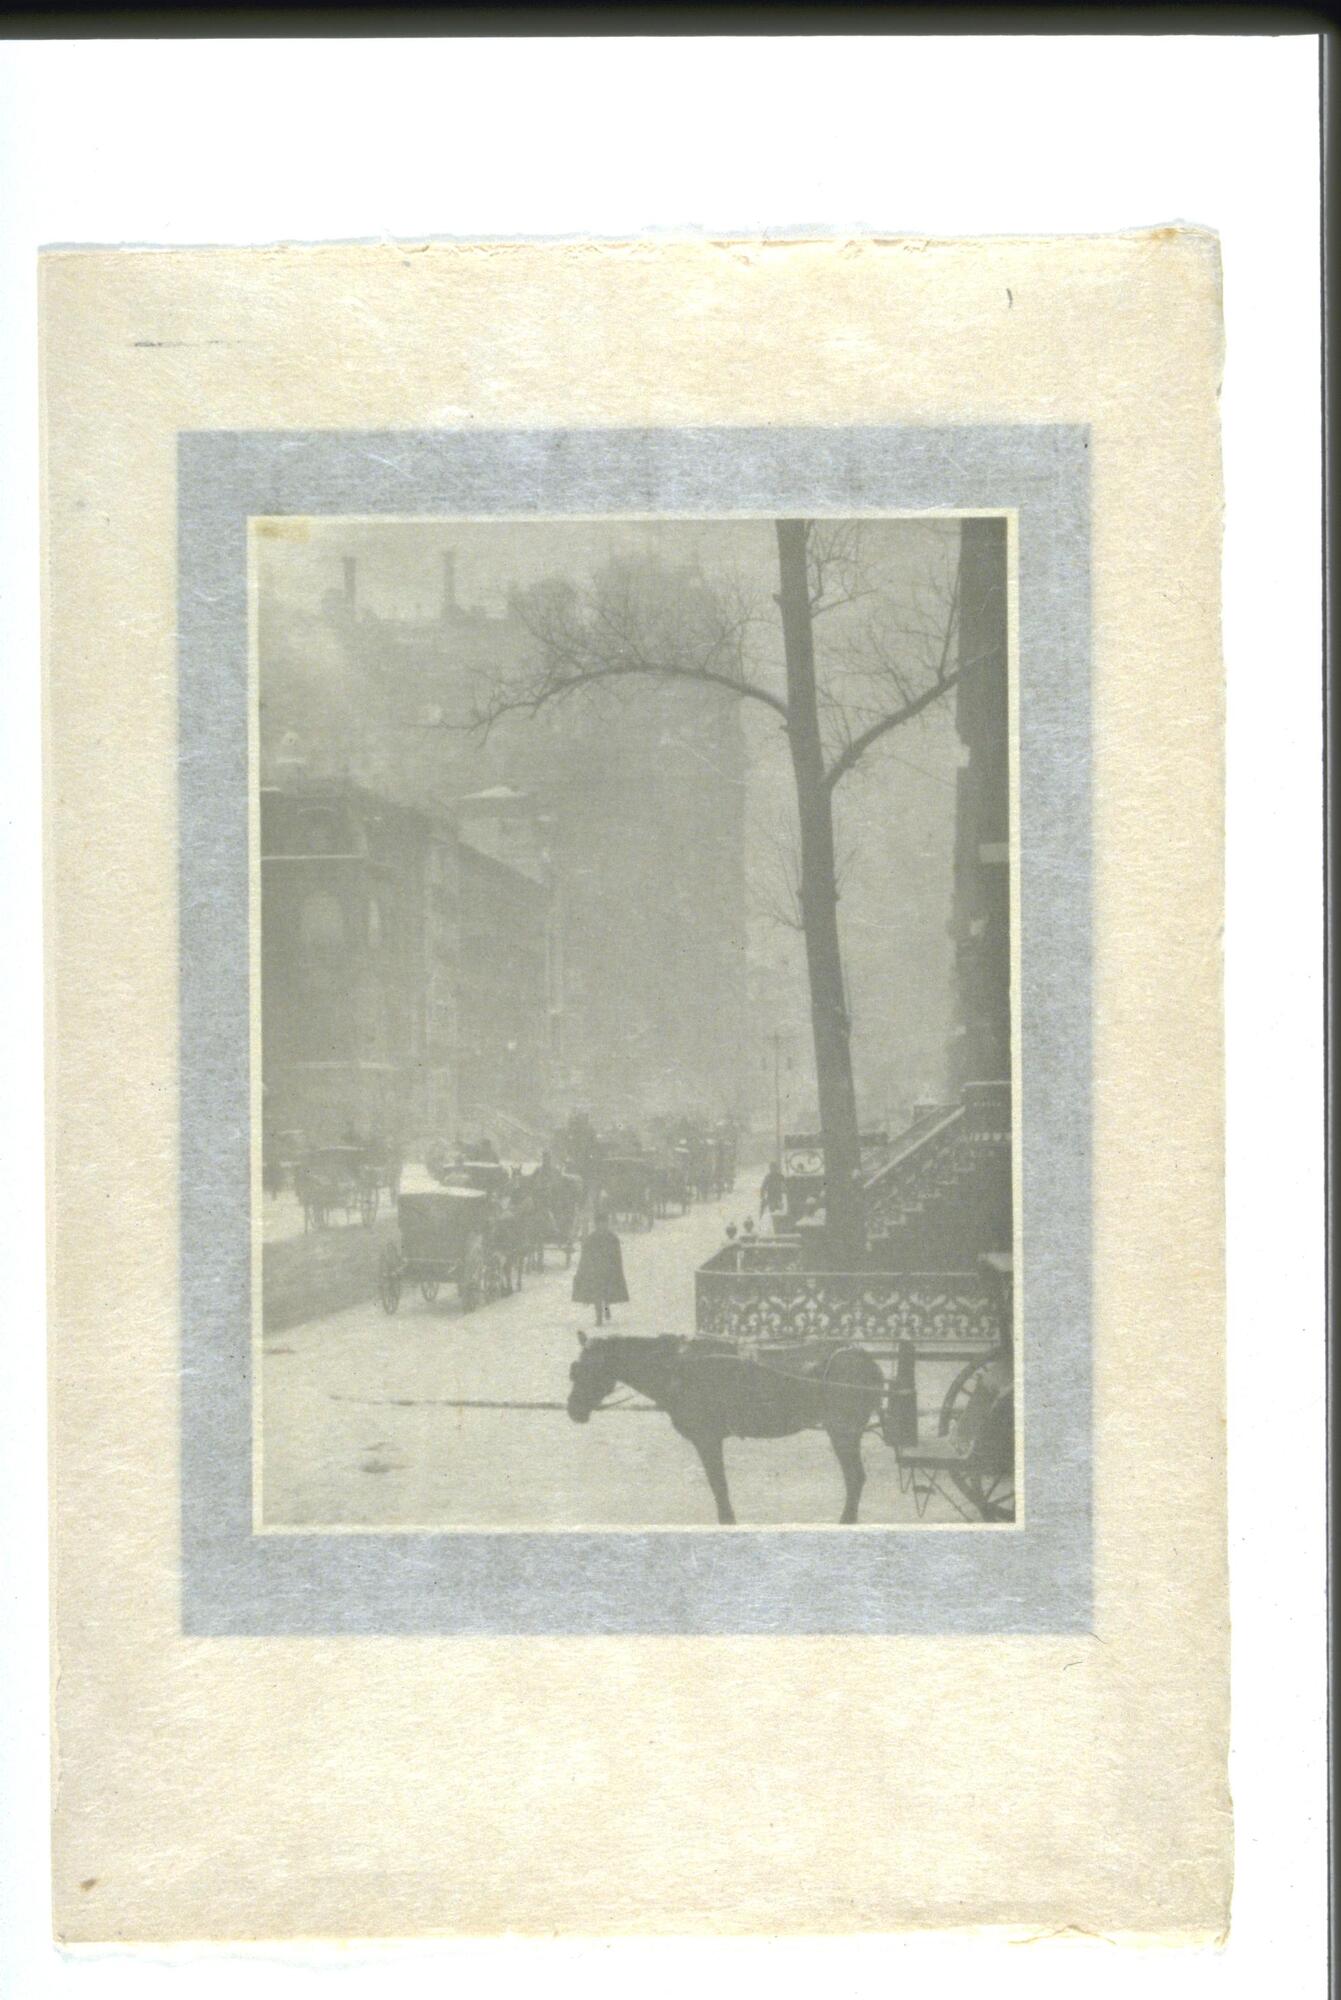 A winter city scene with figures walking on snow-covered streets and riding horse-drawn carriages. 